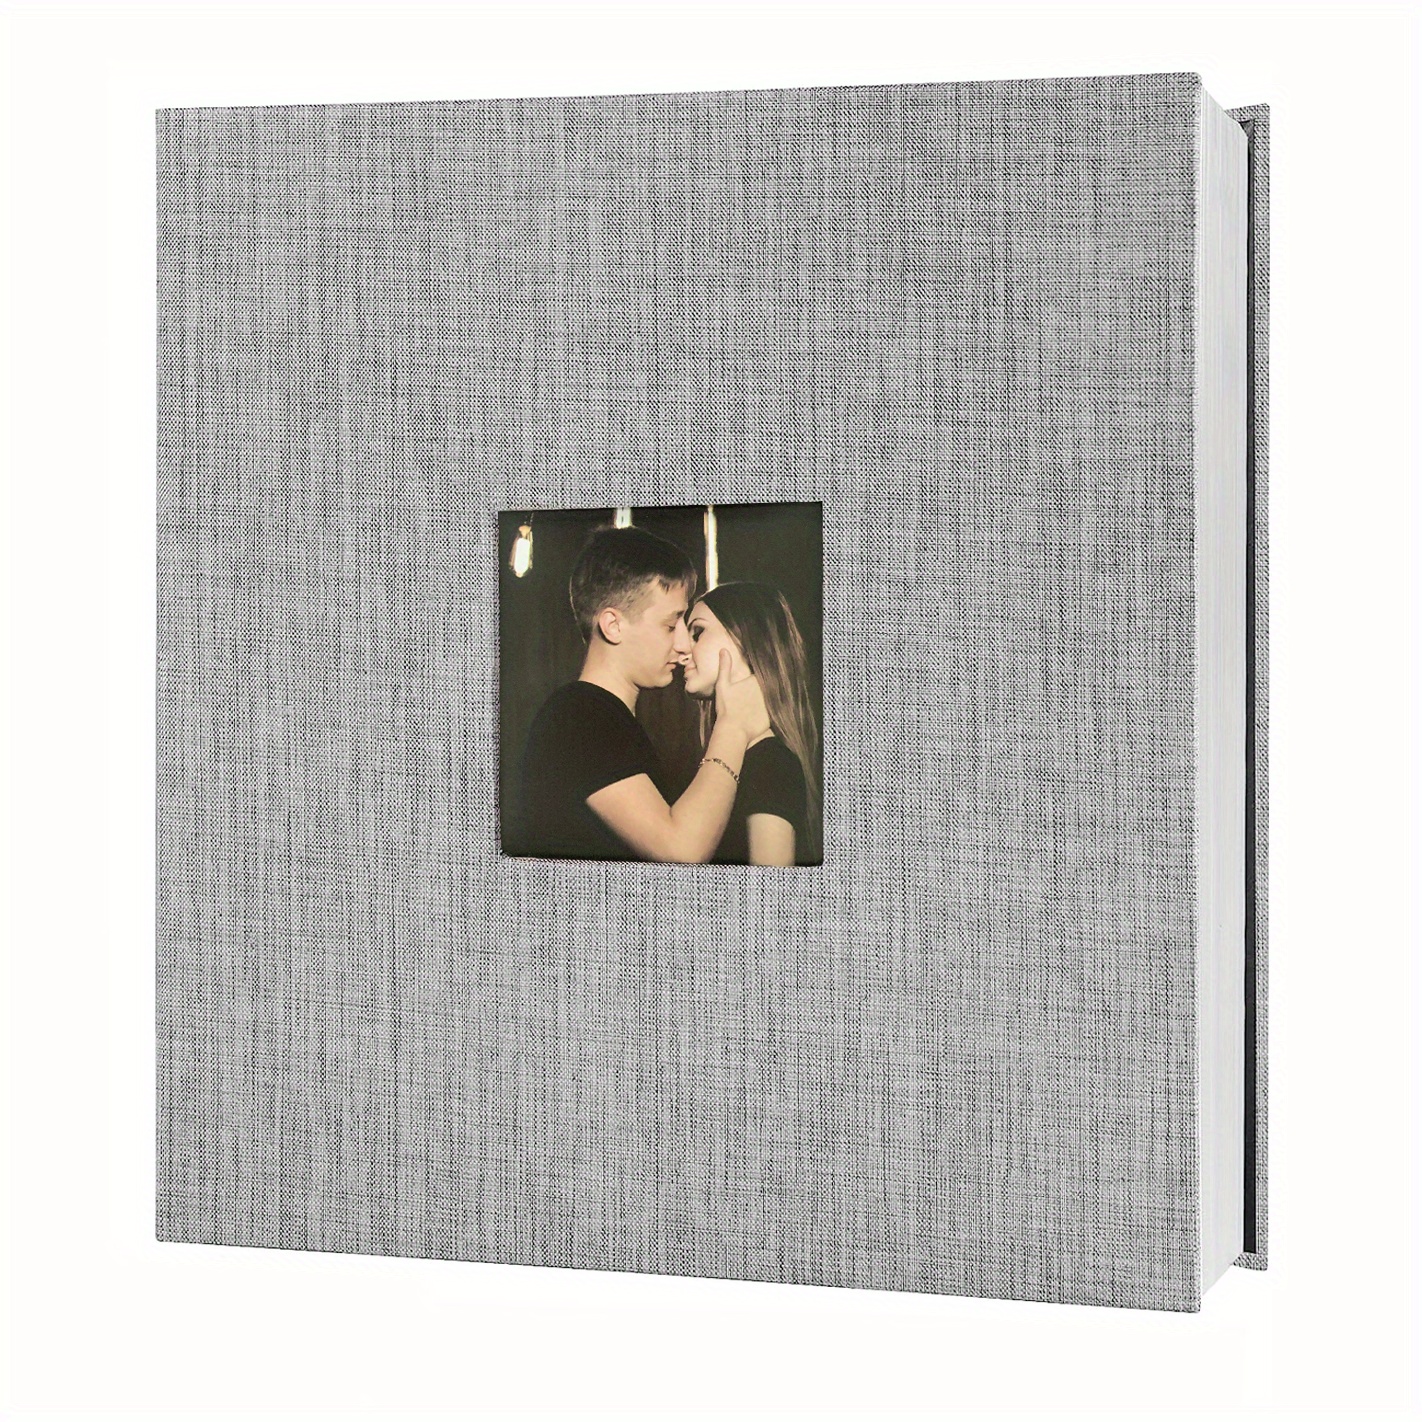  Photo Album Self Adhesive Pages Scrapbook Magnetic Photo Albums  with Sticky Pages for 4x6 5x7 8x10 Pictures Books with A Metallic Pen for  Baby Family Wedding 11x10.6 Grey 40 Pages